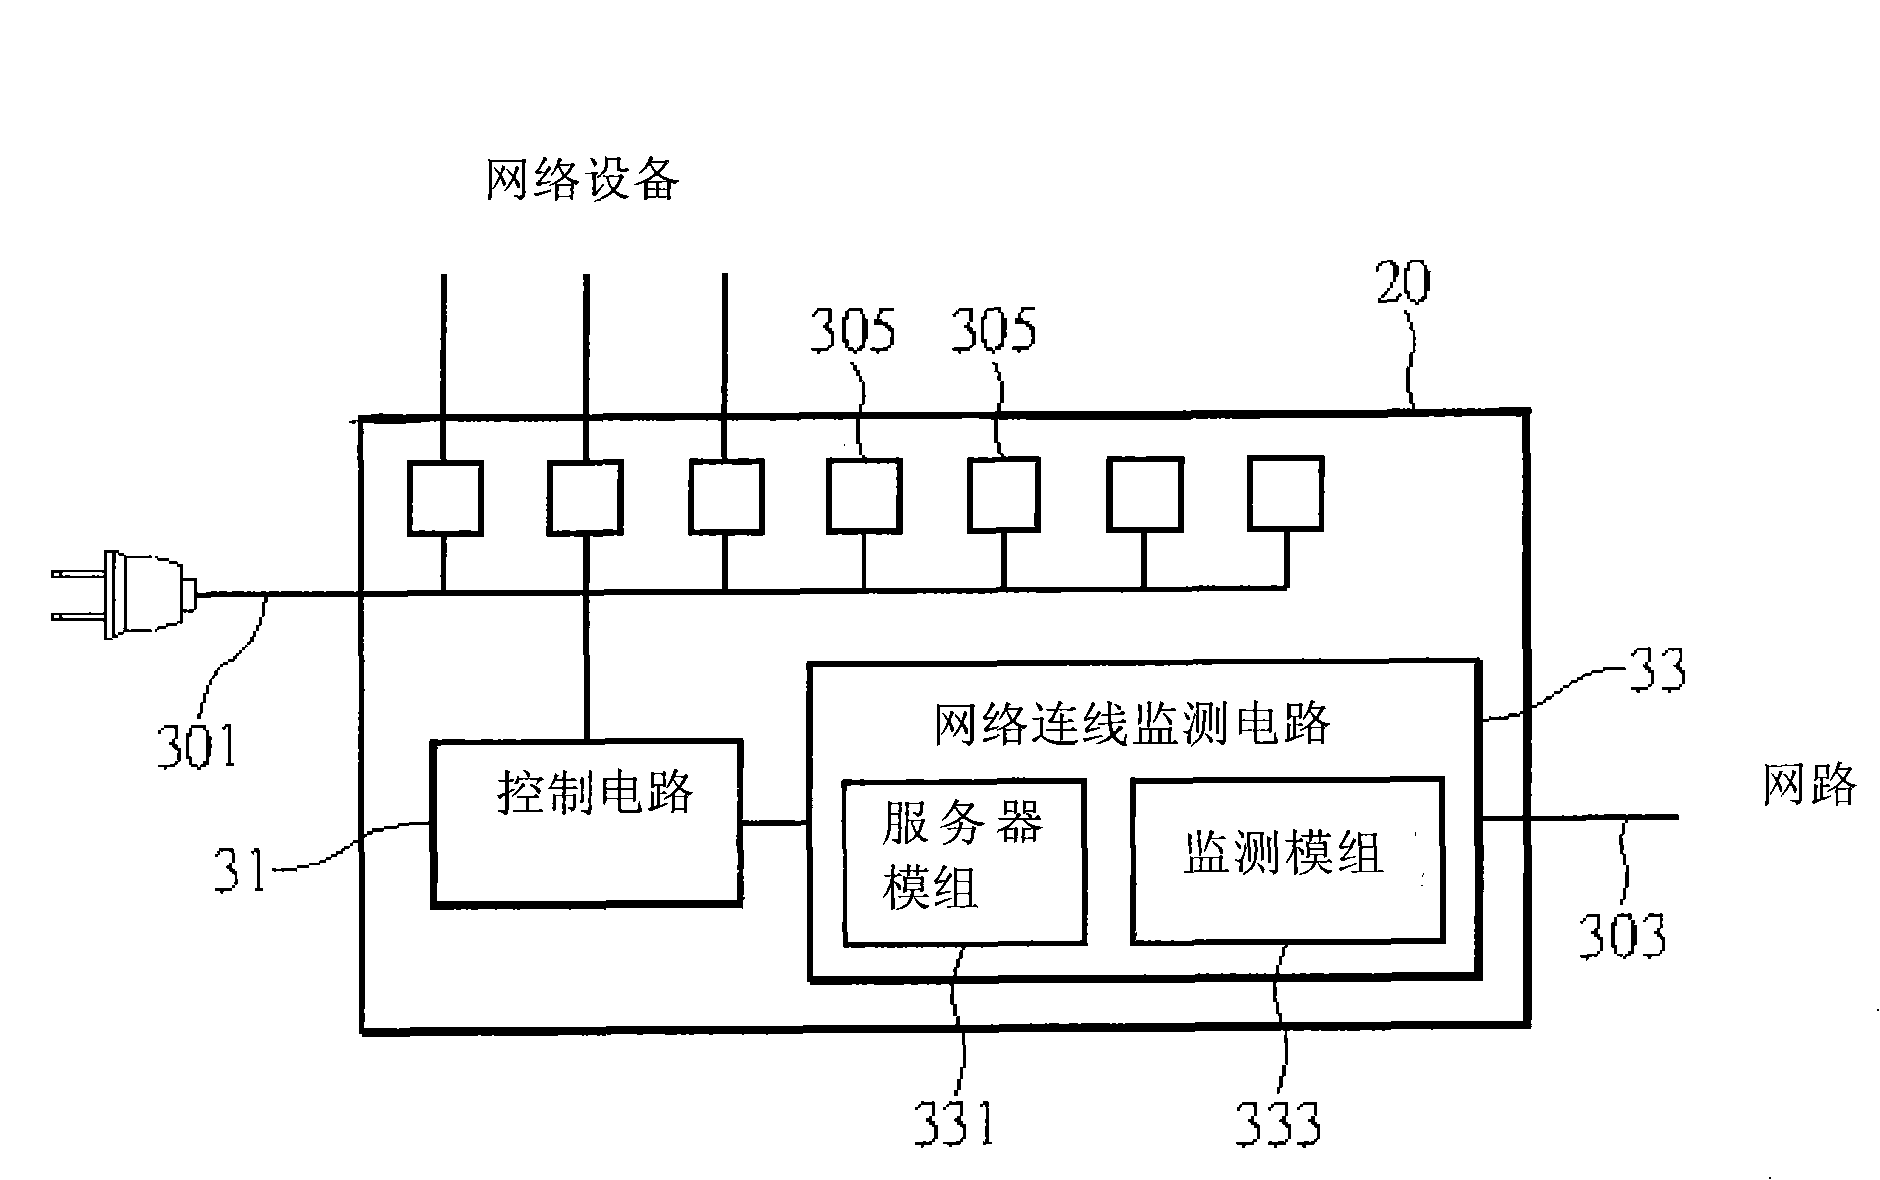 Electric control method and apparatus for monitoring network wire break and automatically restarting network equipment